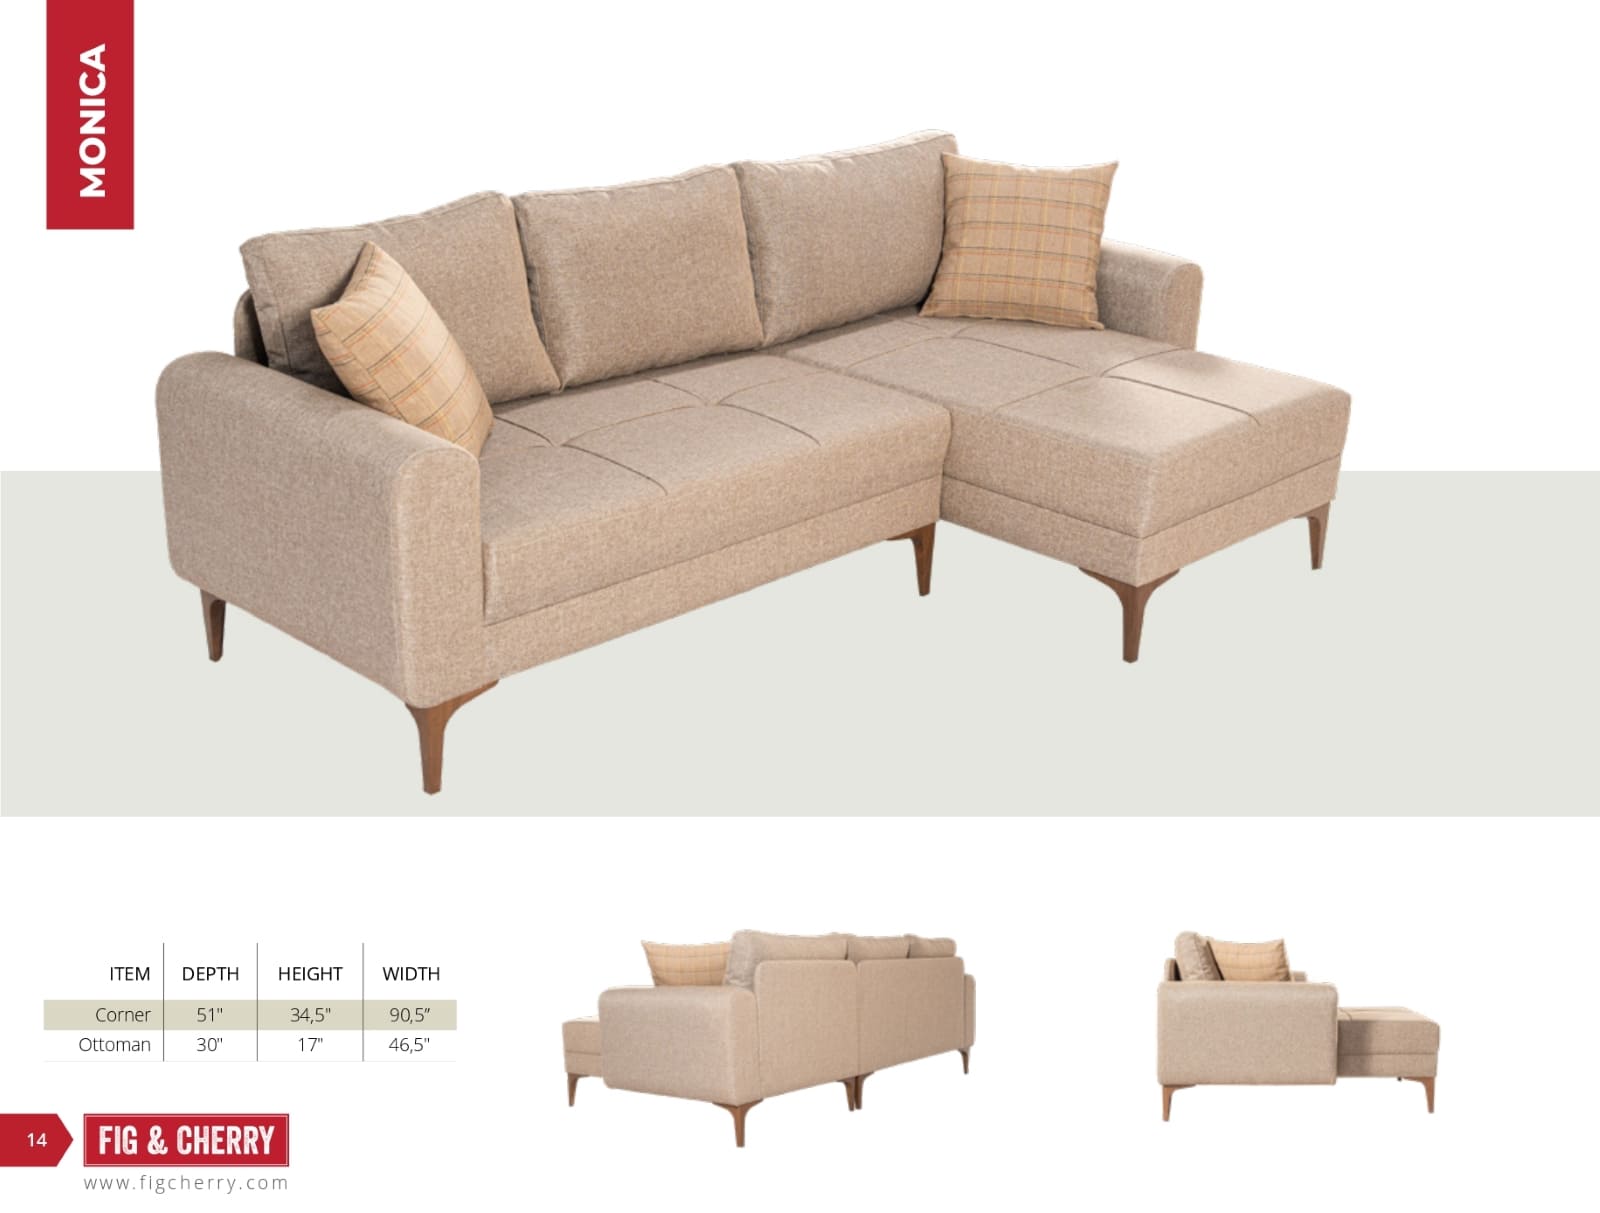 Fig & Cherry Indoor Collection (Sofas and Sectionals) Catalog (14)